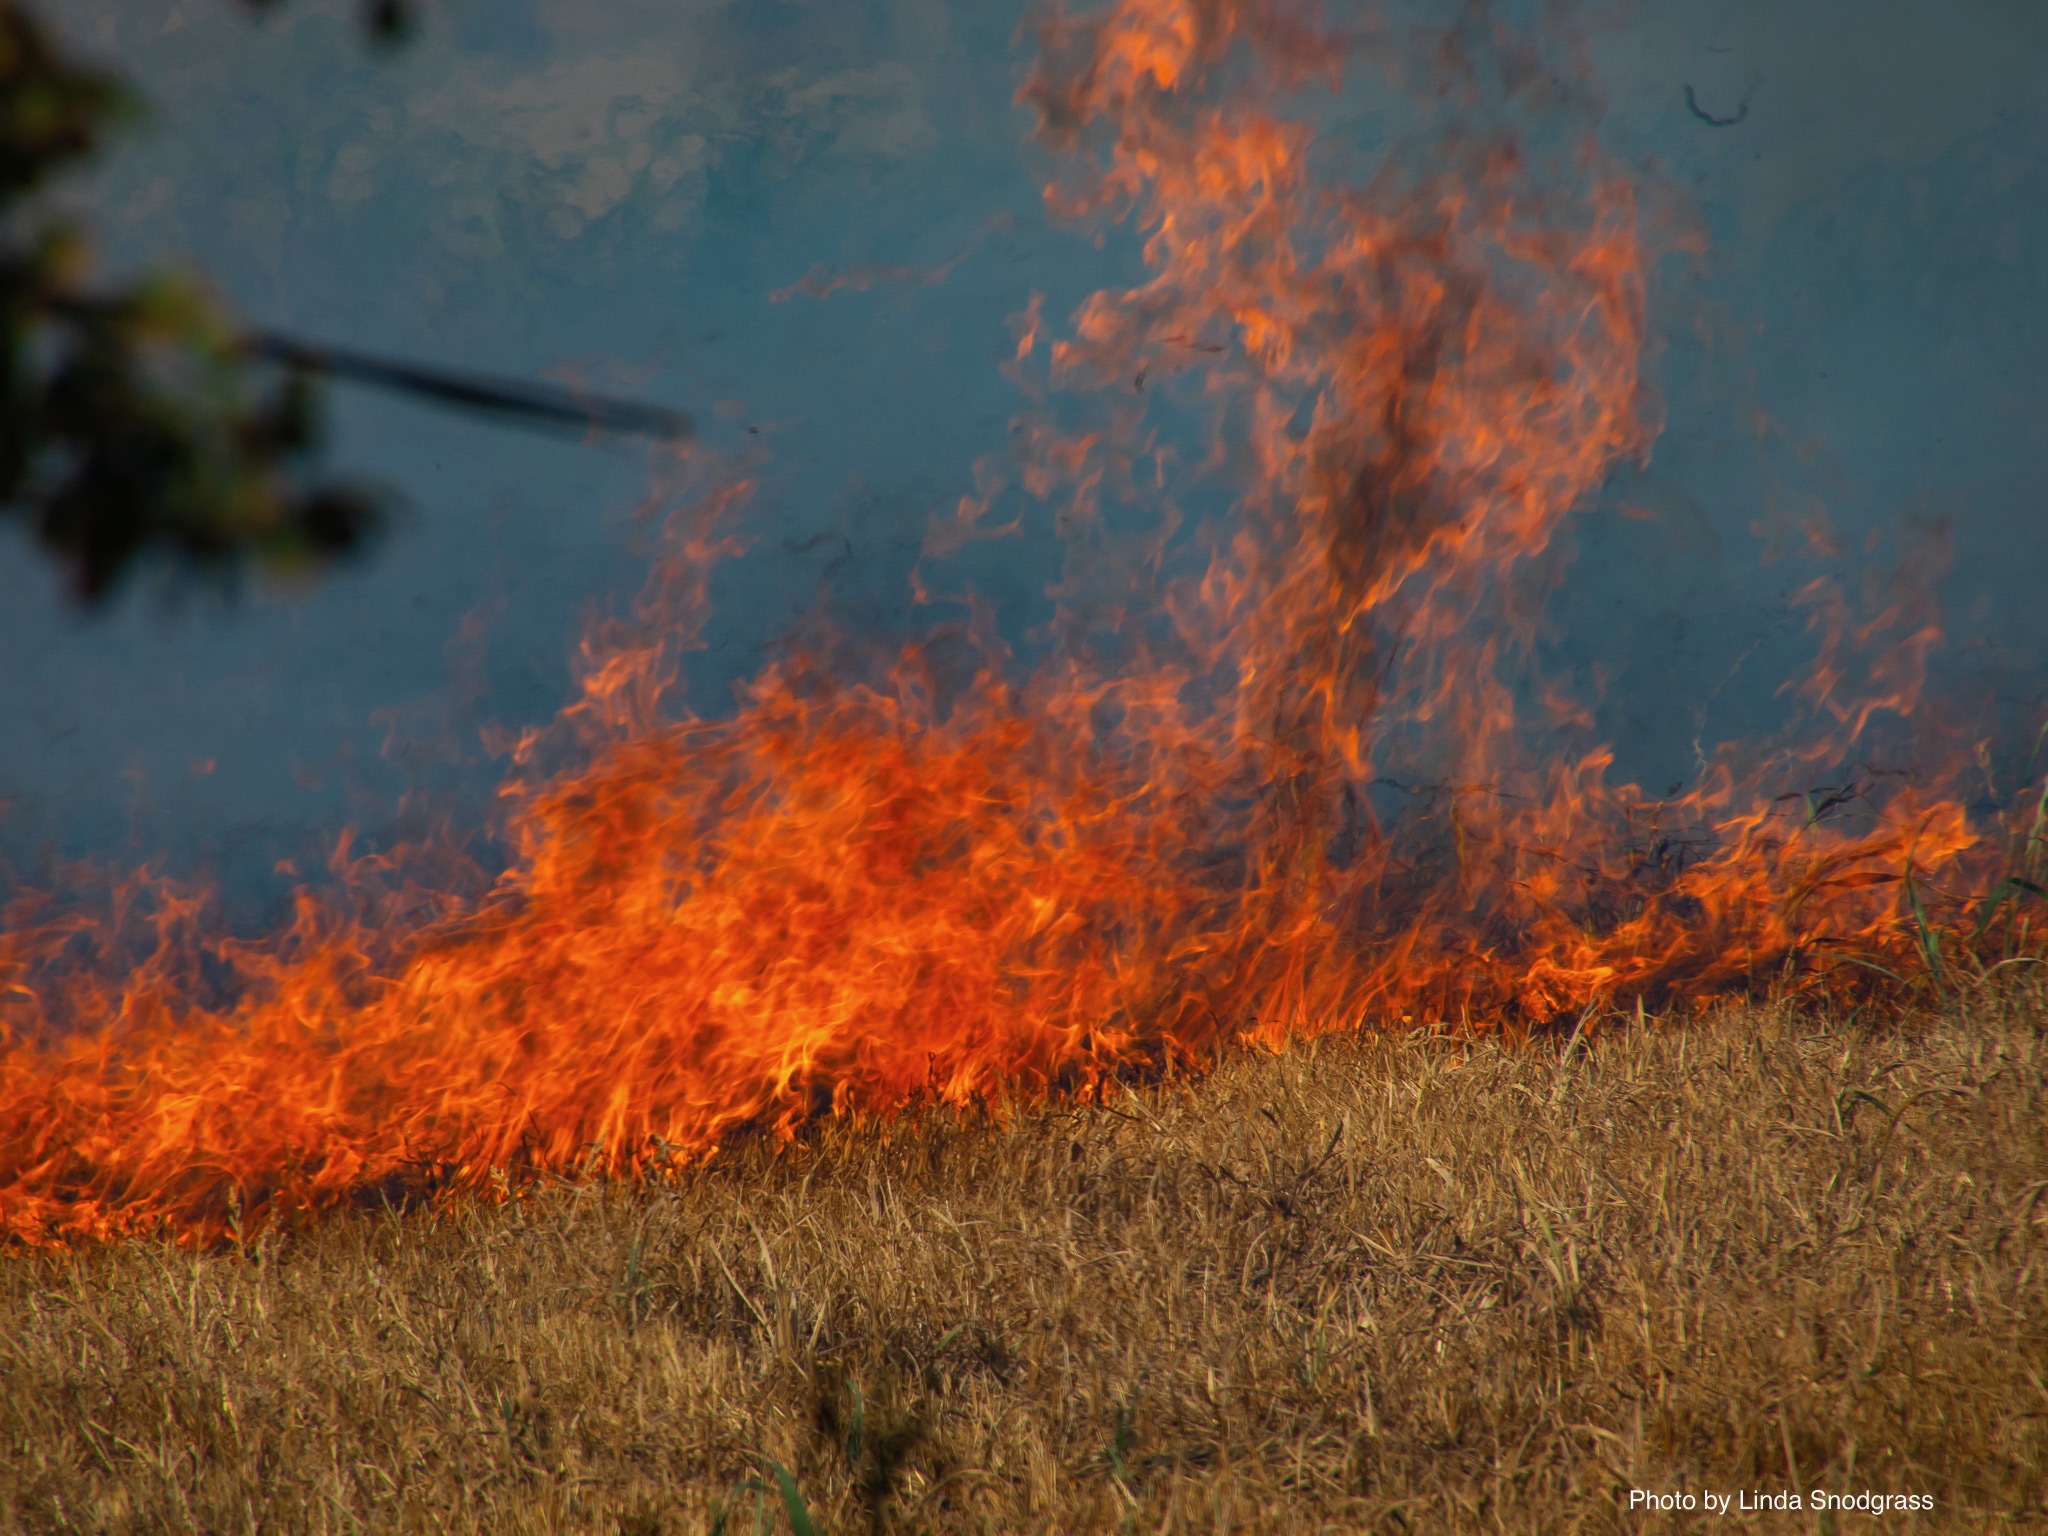 Flames burn on a field of dry grasses